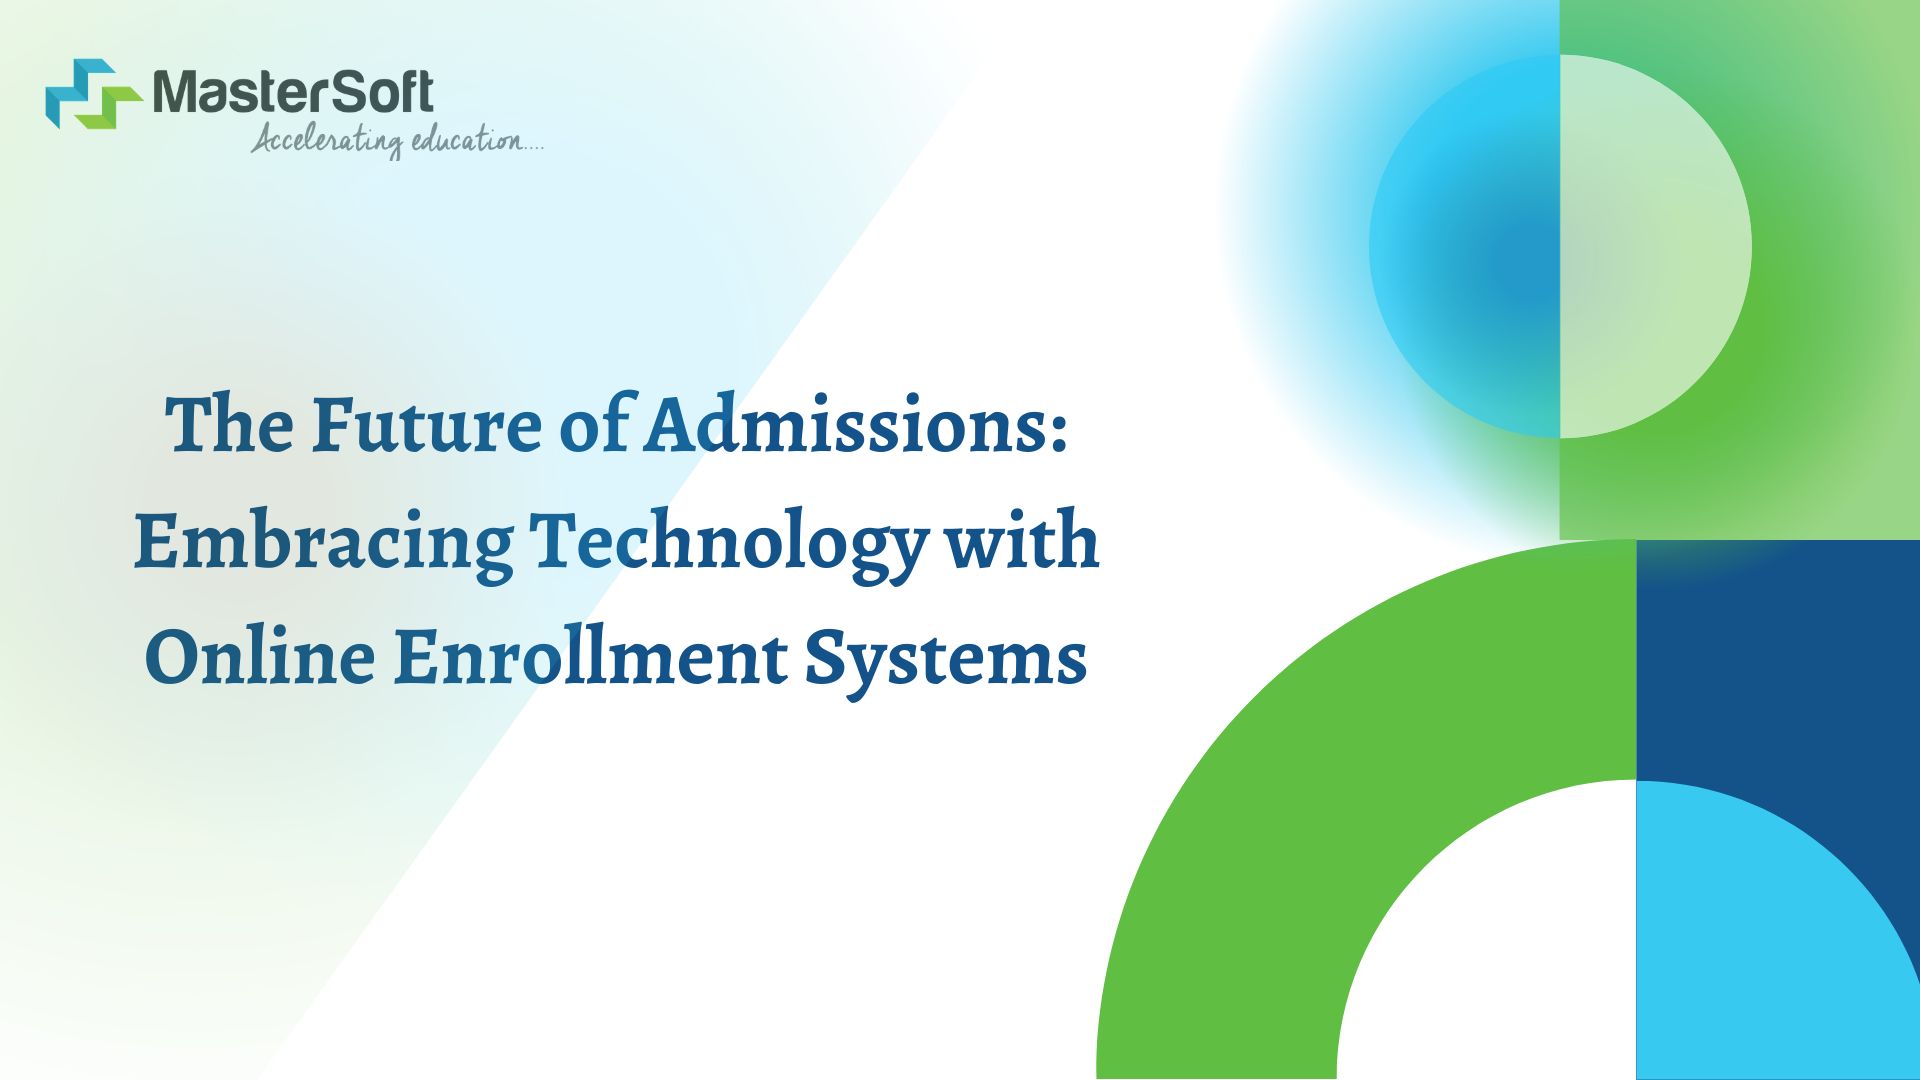 The Future of Admissions: Embracing Technology with Online Enrollment Systems